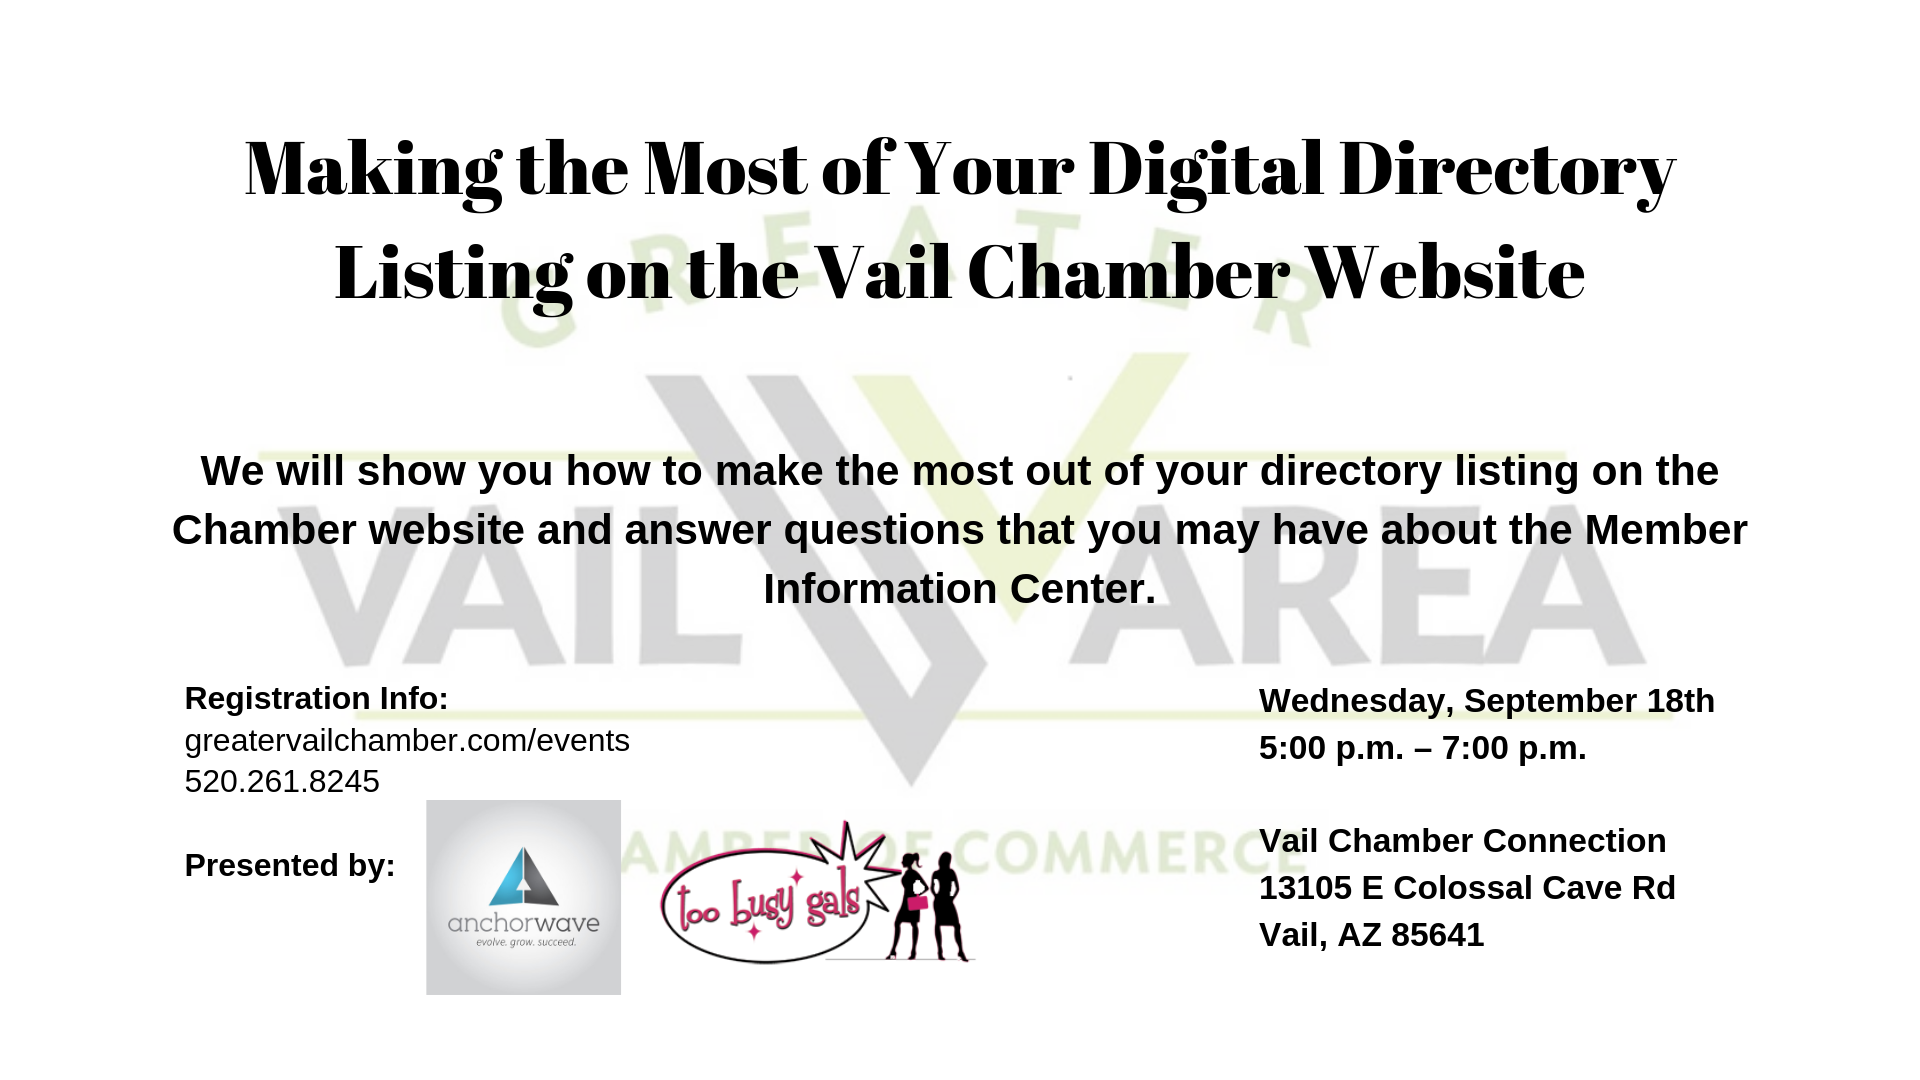 Making the Most Out of Your Digital Presence at the Vail Chamber